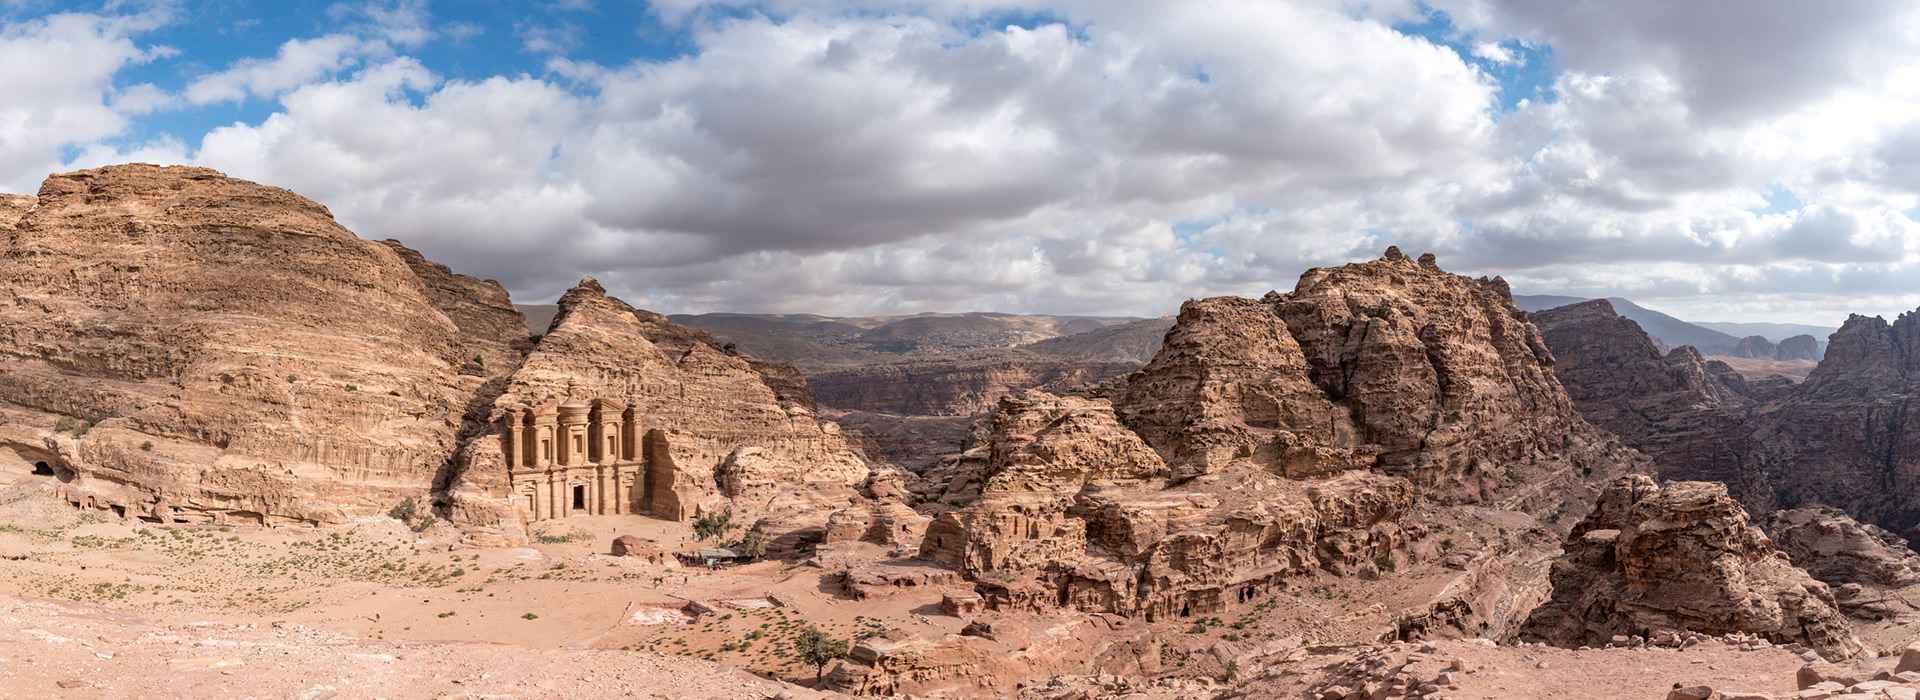 Jordan Travel Guide - Travel Insights and Tips